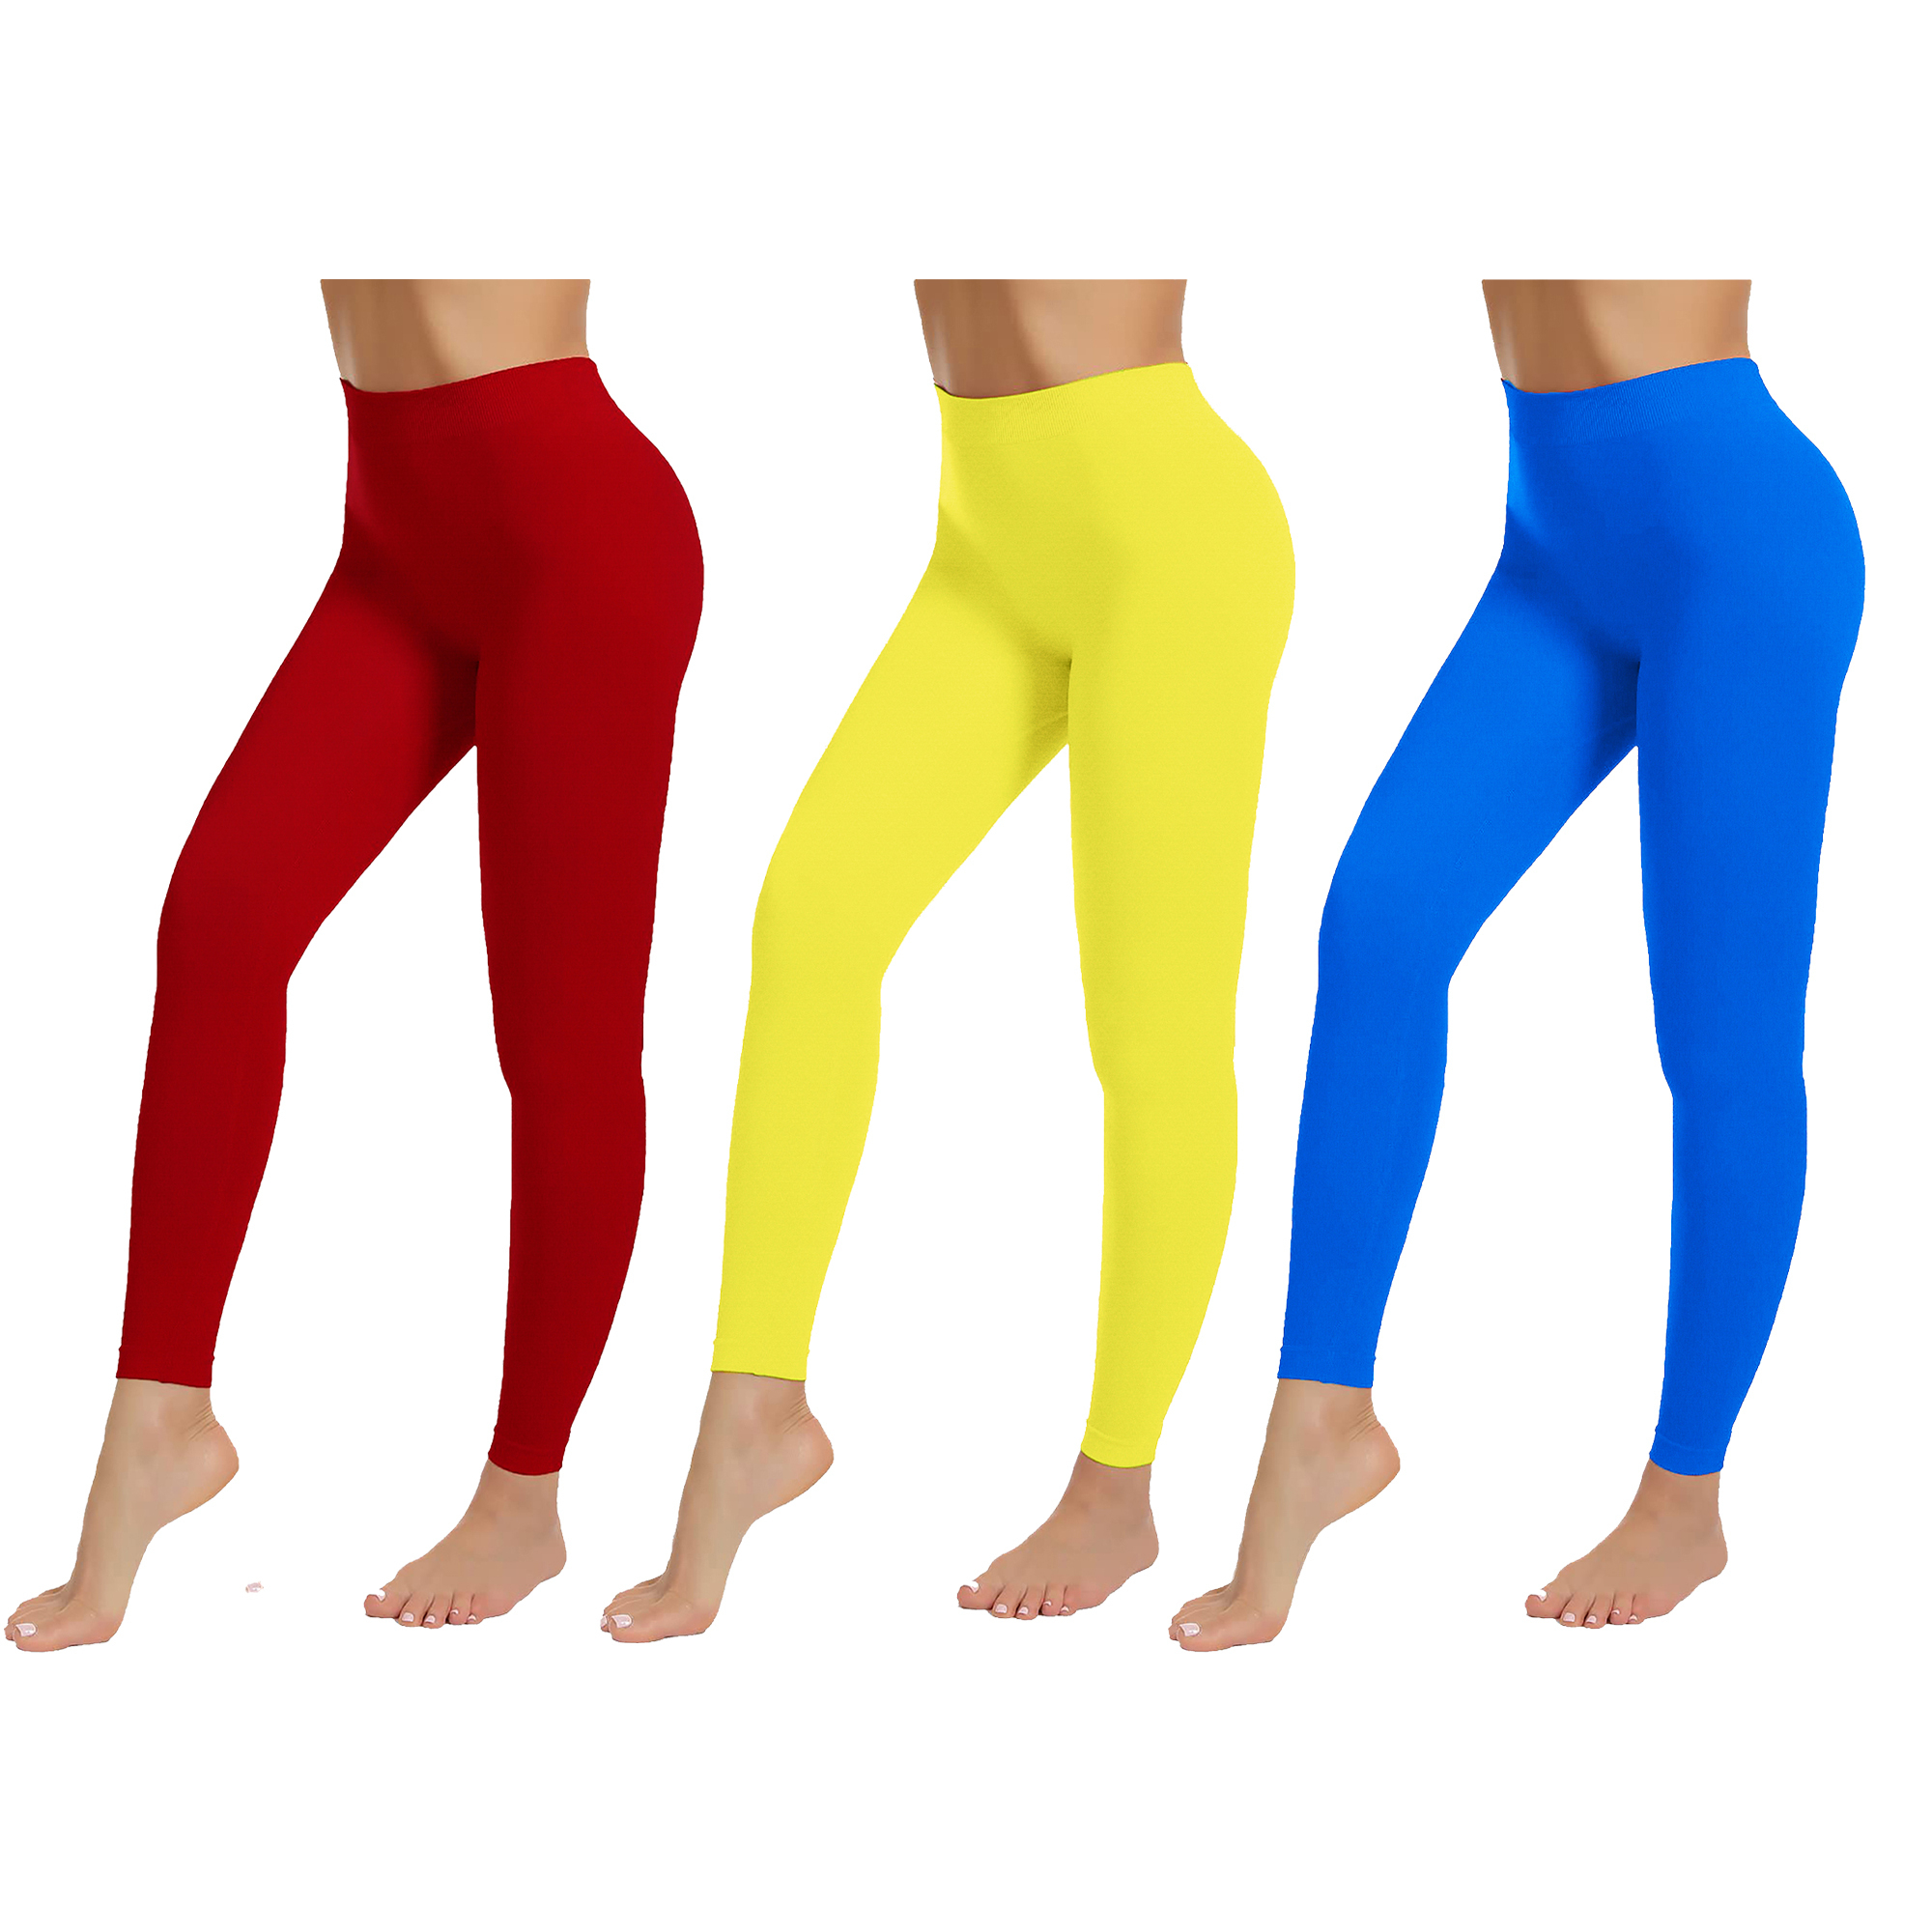 3-Pack: Women's High-Waist Ultra-Soft Stretchy Solid Fitness Yoga Leggings Pants - RED, M